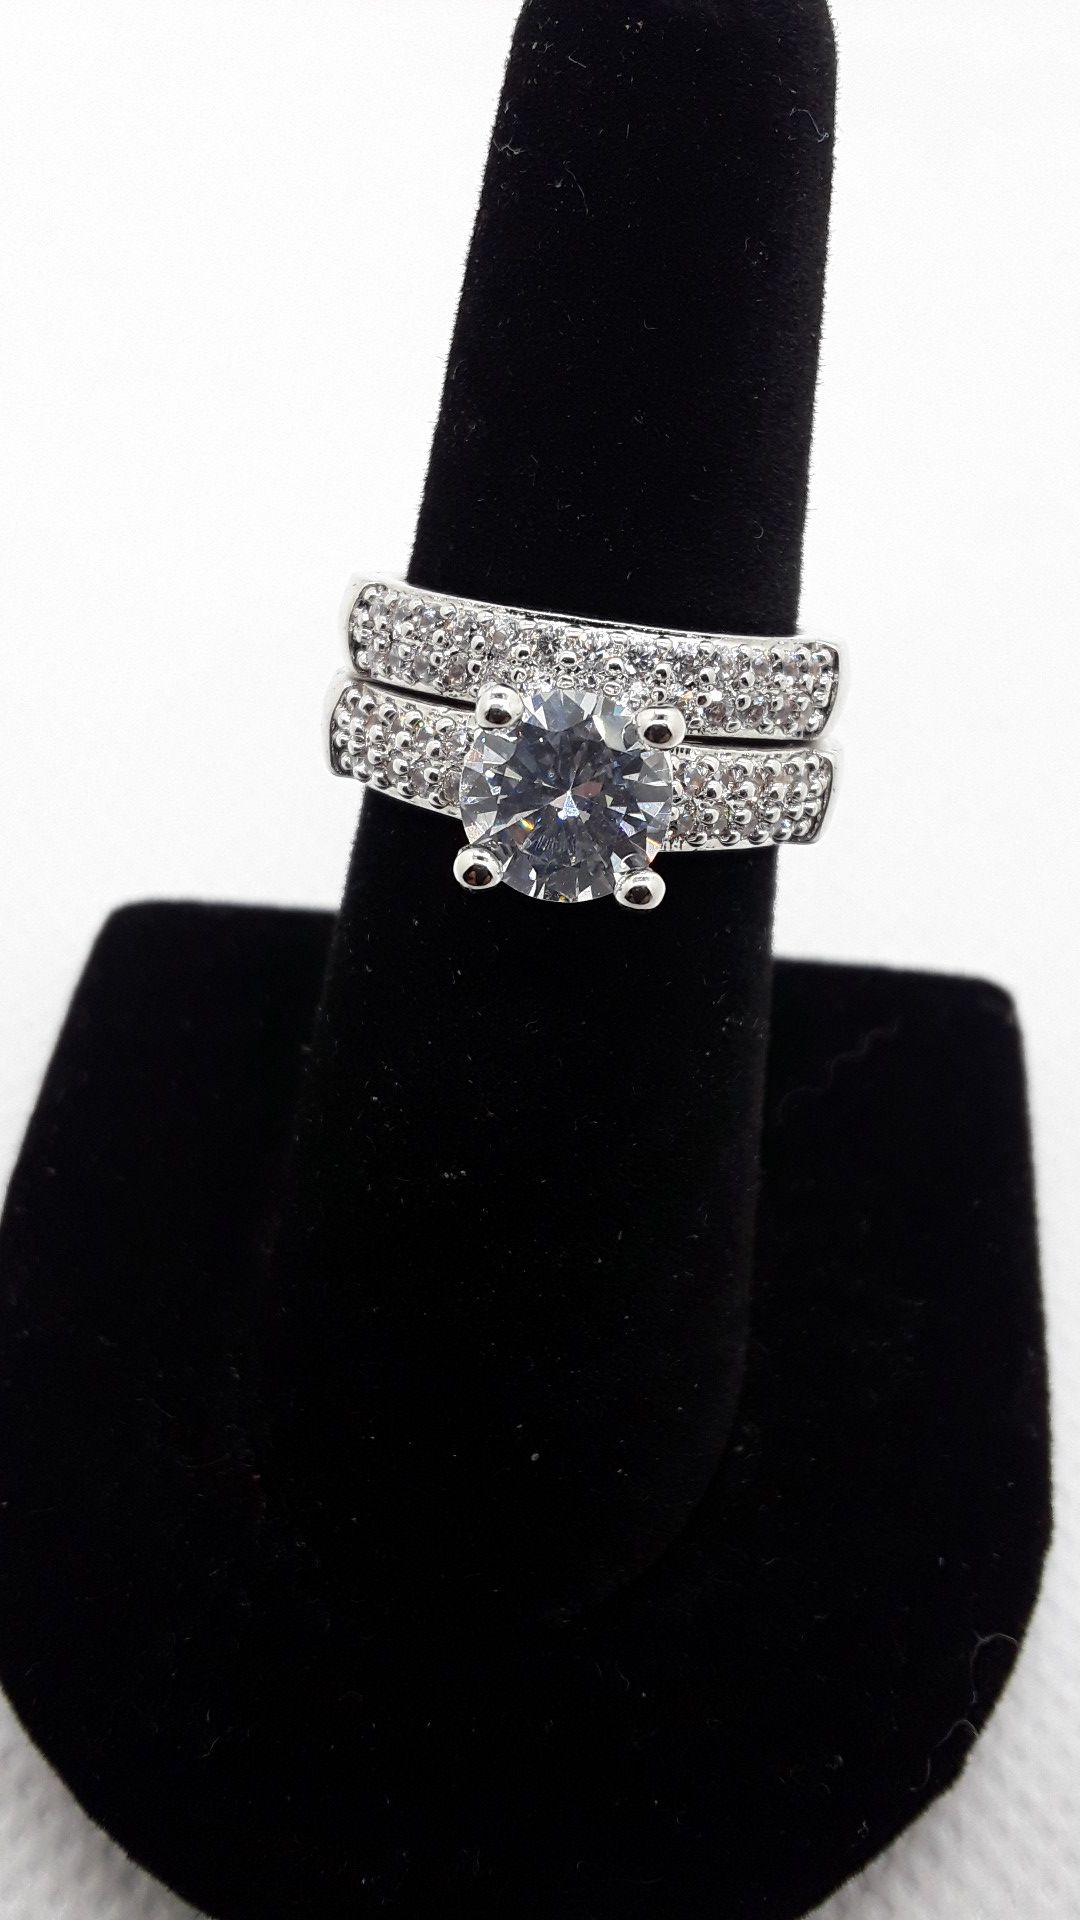 Beautiful 2 ring set large CZ center stone sparkles a lot wedding engagement ring promise ring